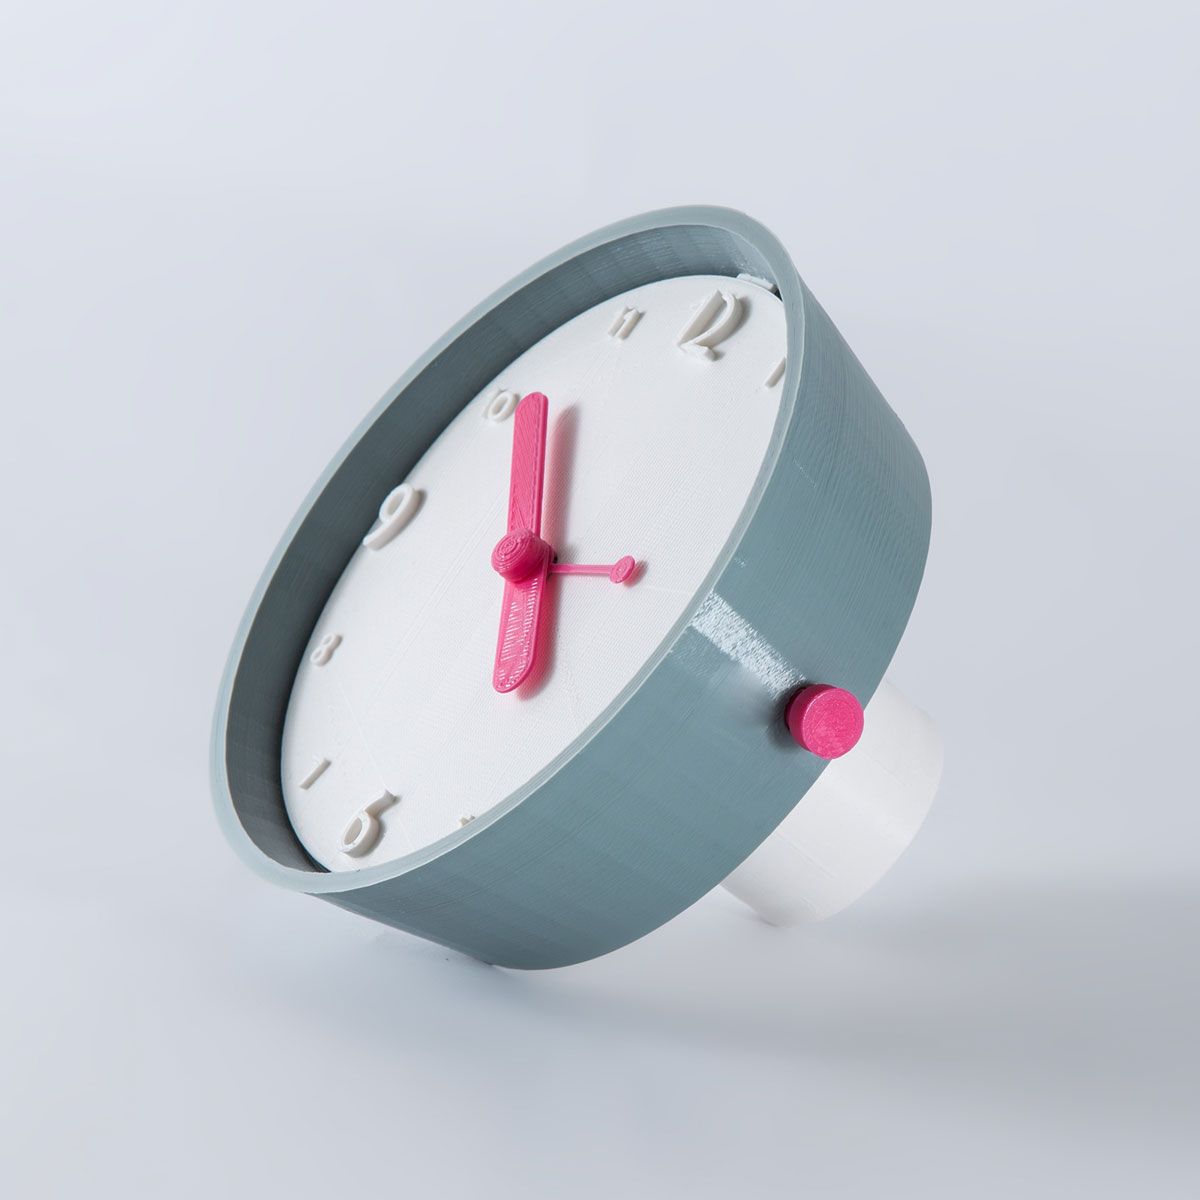 Time Goes Around [Table Clock]